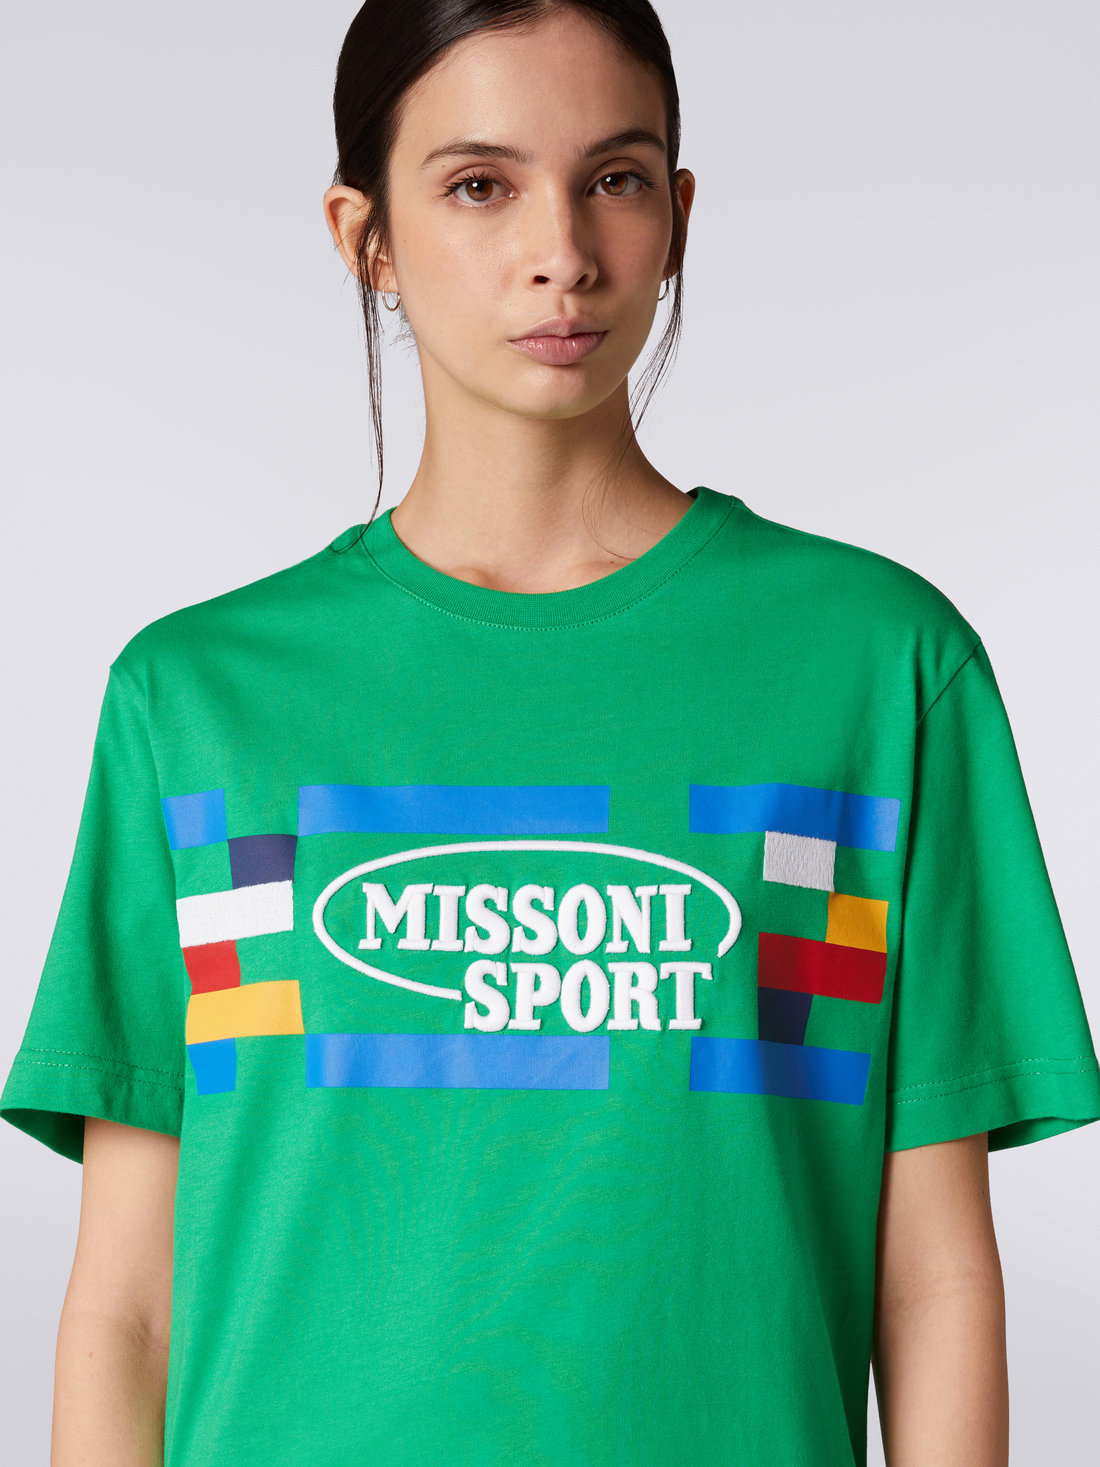 Crew-neck cotton T-shirt with logo and contrasting piping, Green & Multicoloured  - DC23SL00BJ00EBS6118 - 4